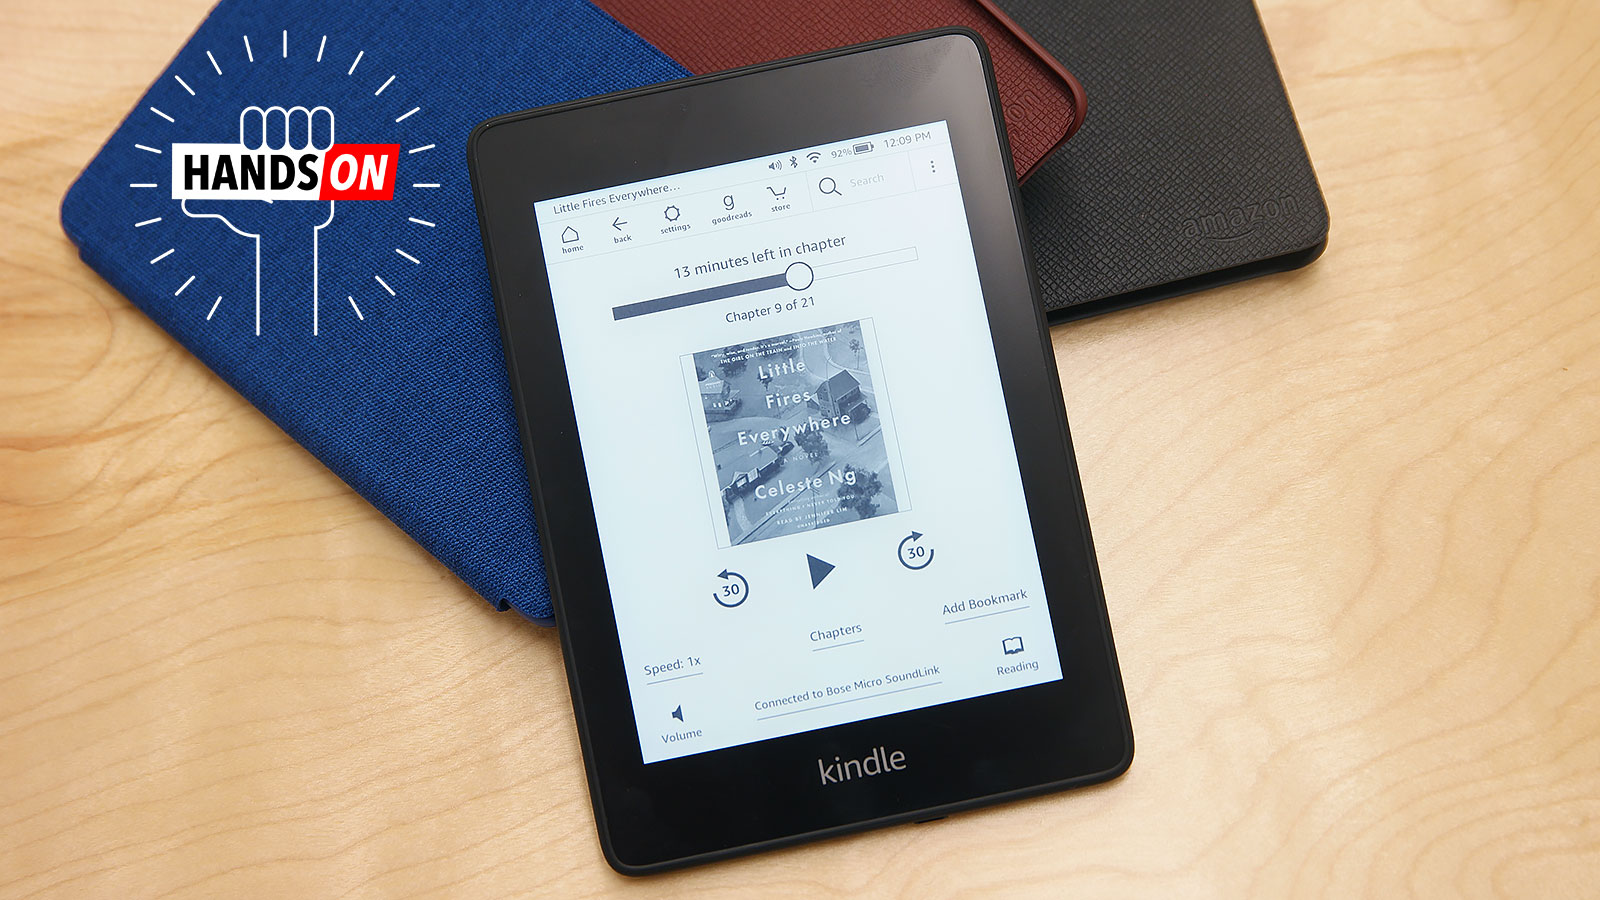 Amazon's Most Popular Kindle Could Now Be Its Best Buy